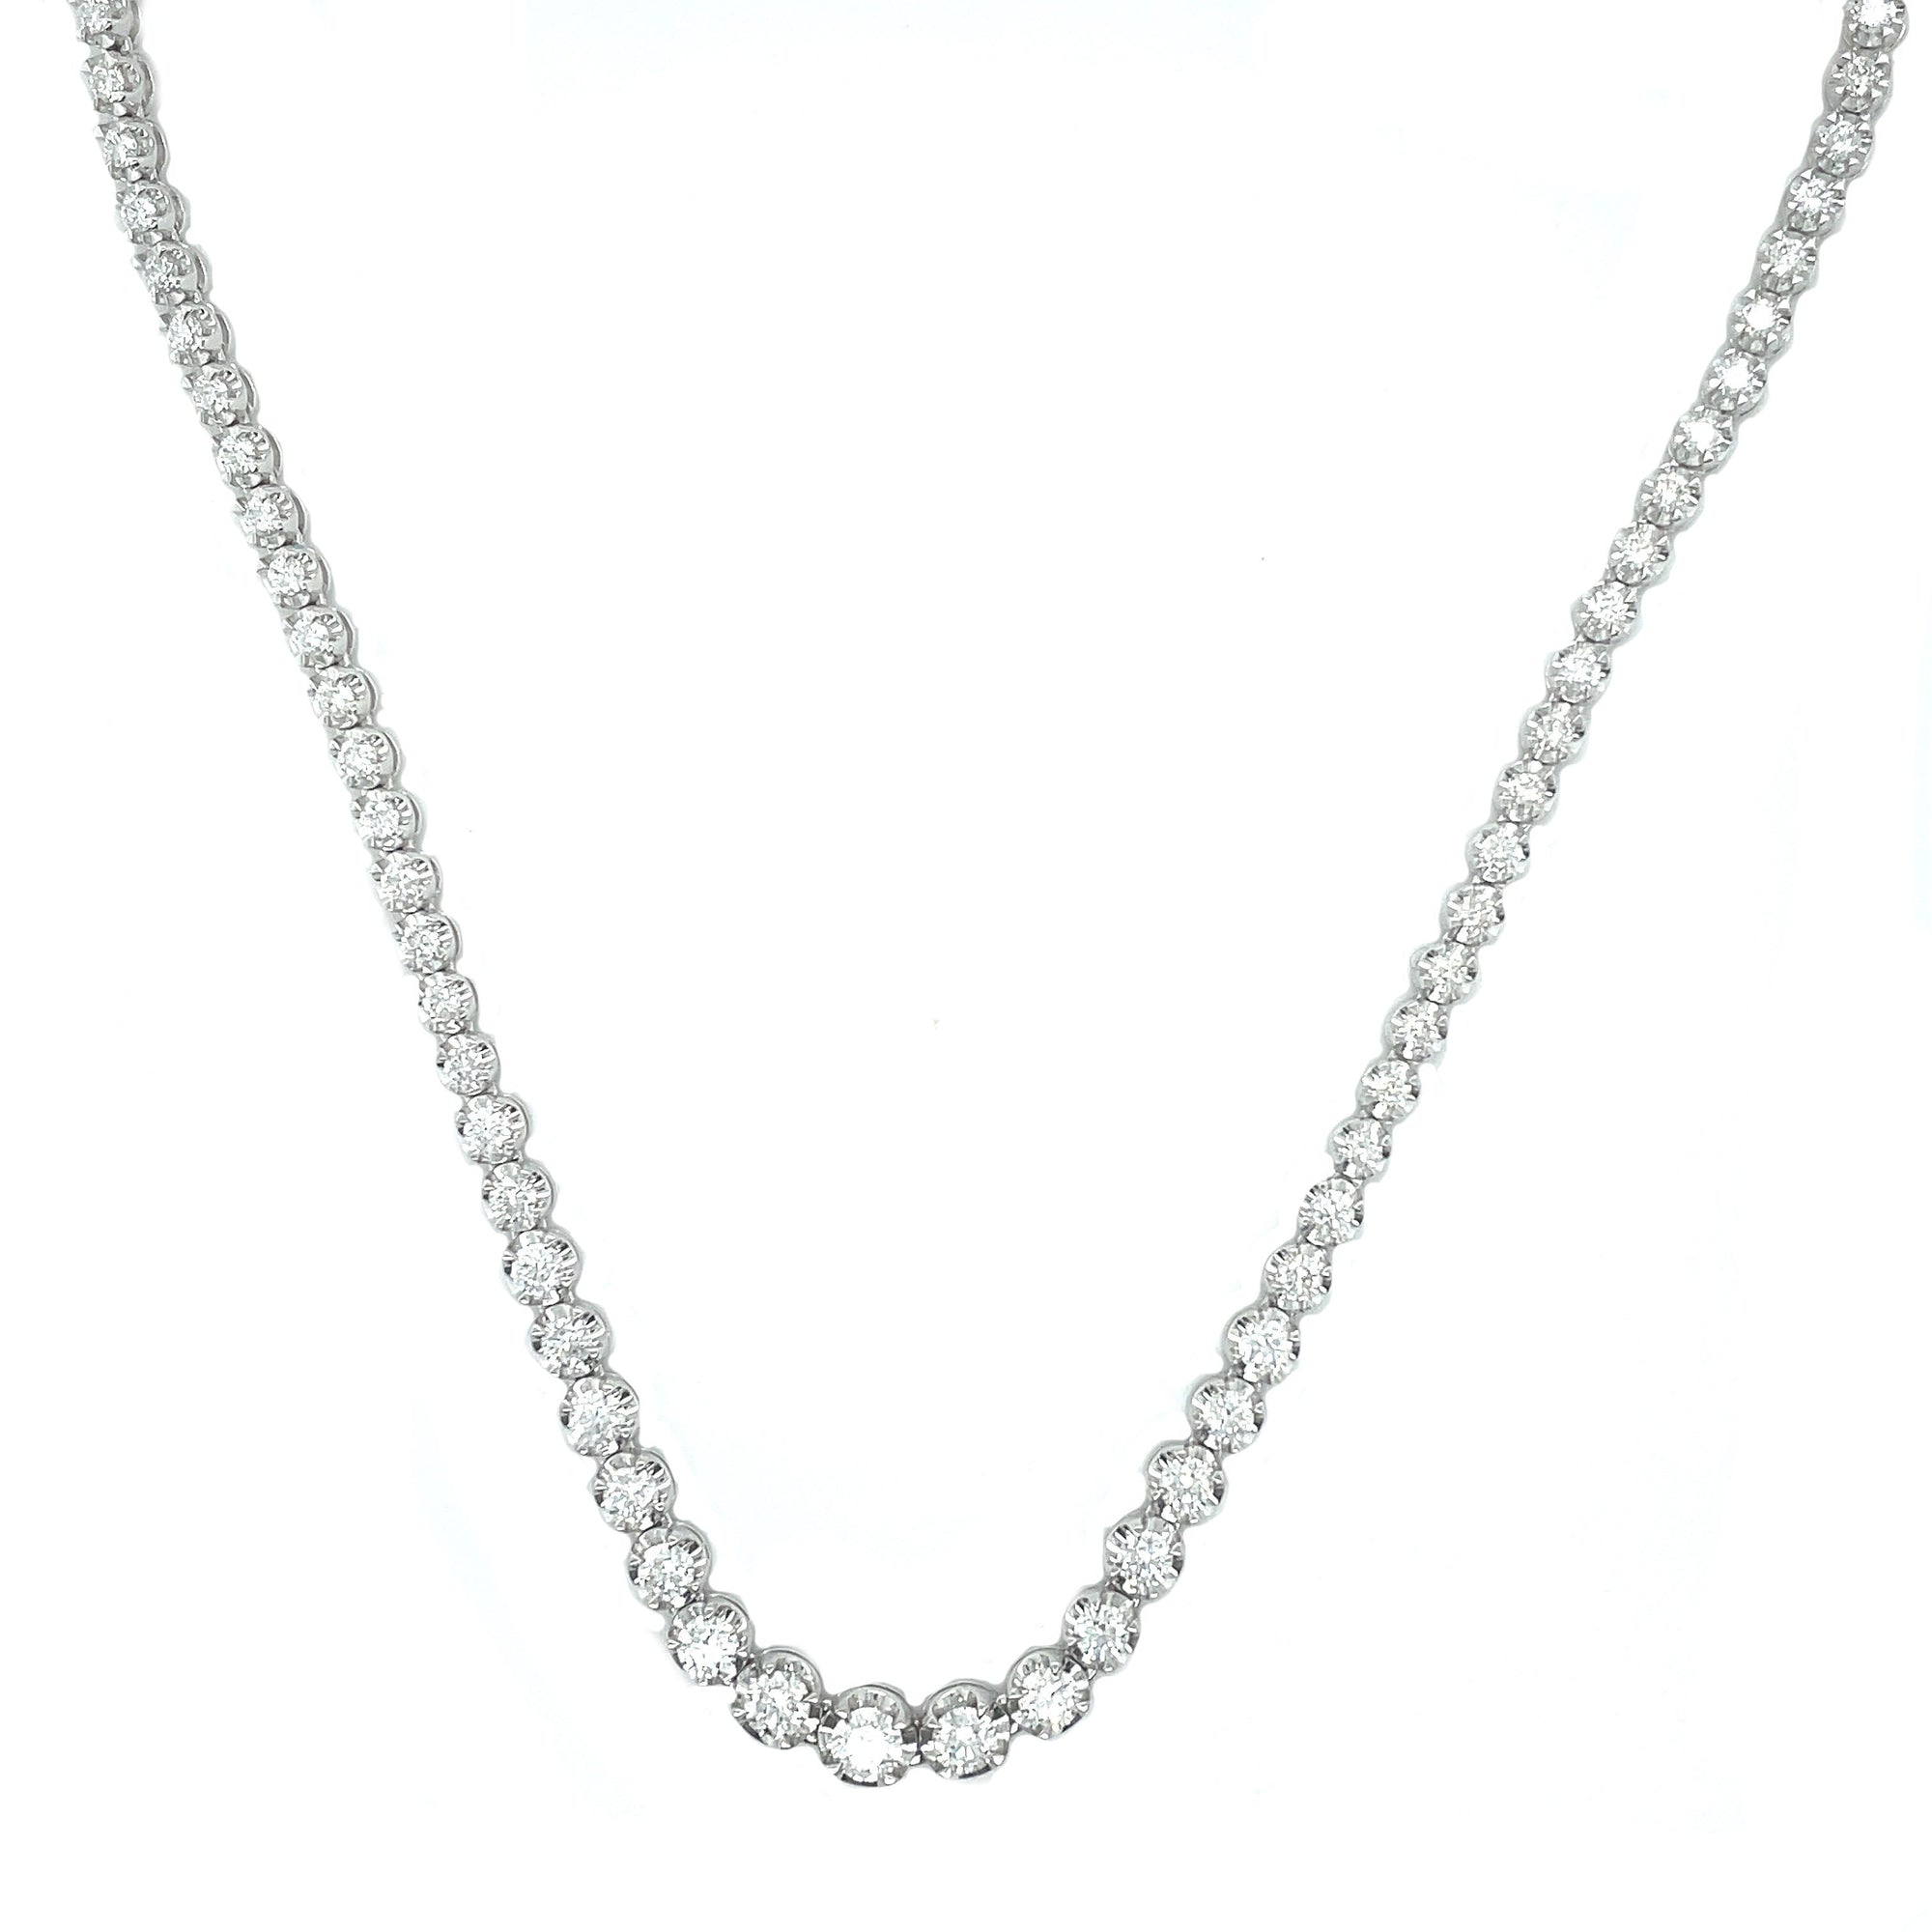 Taper Line Necklace